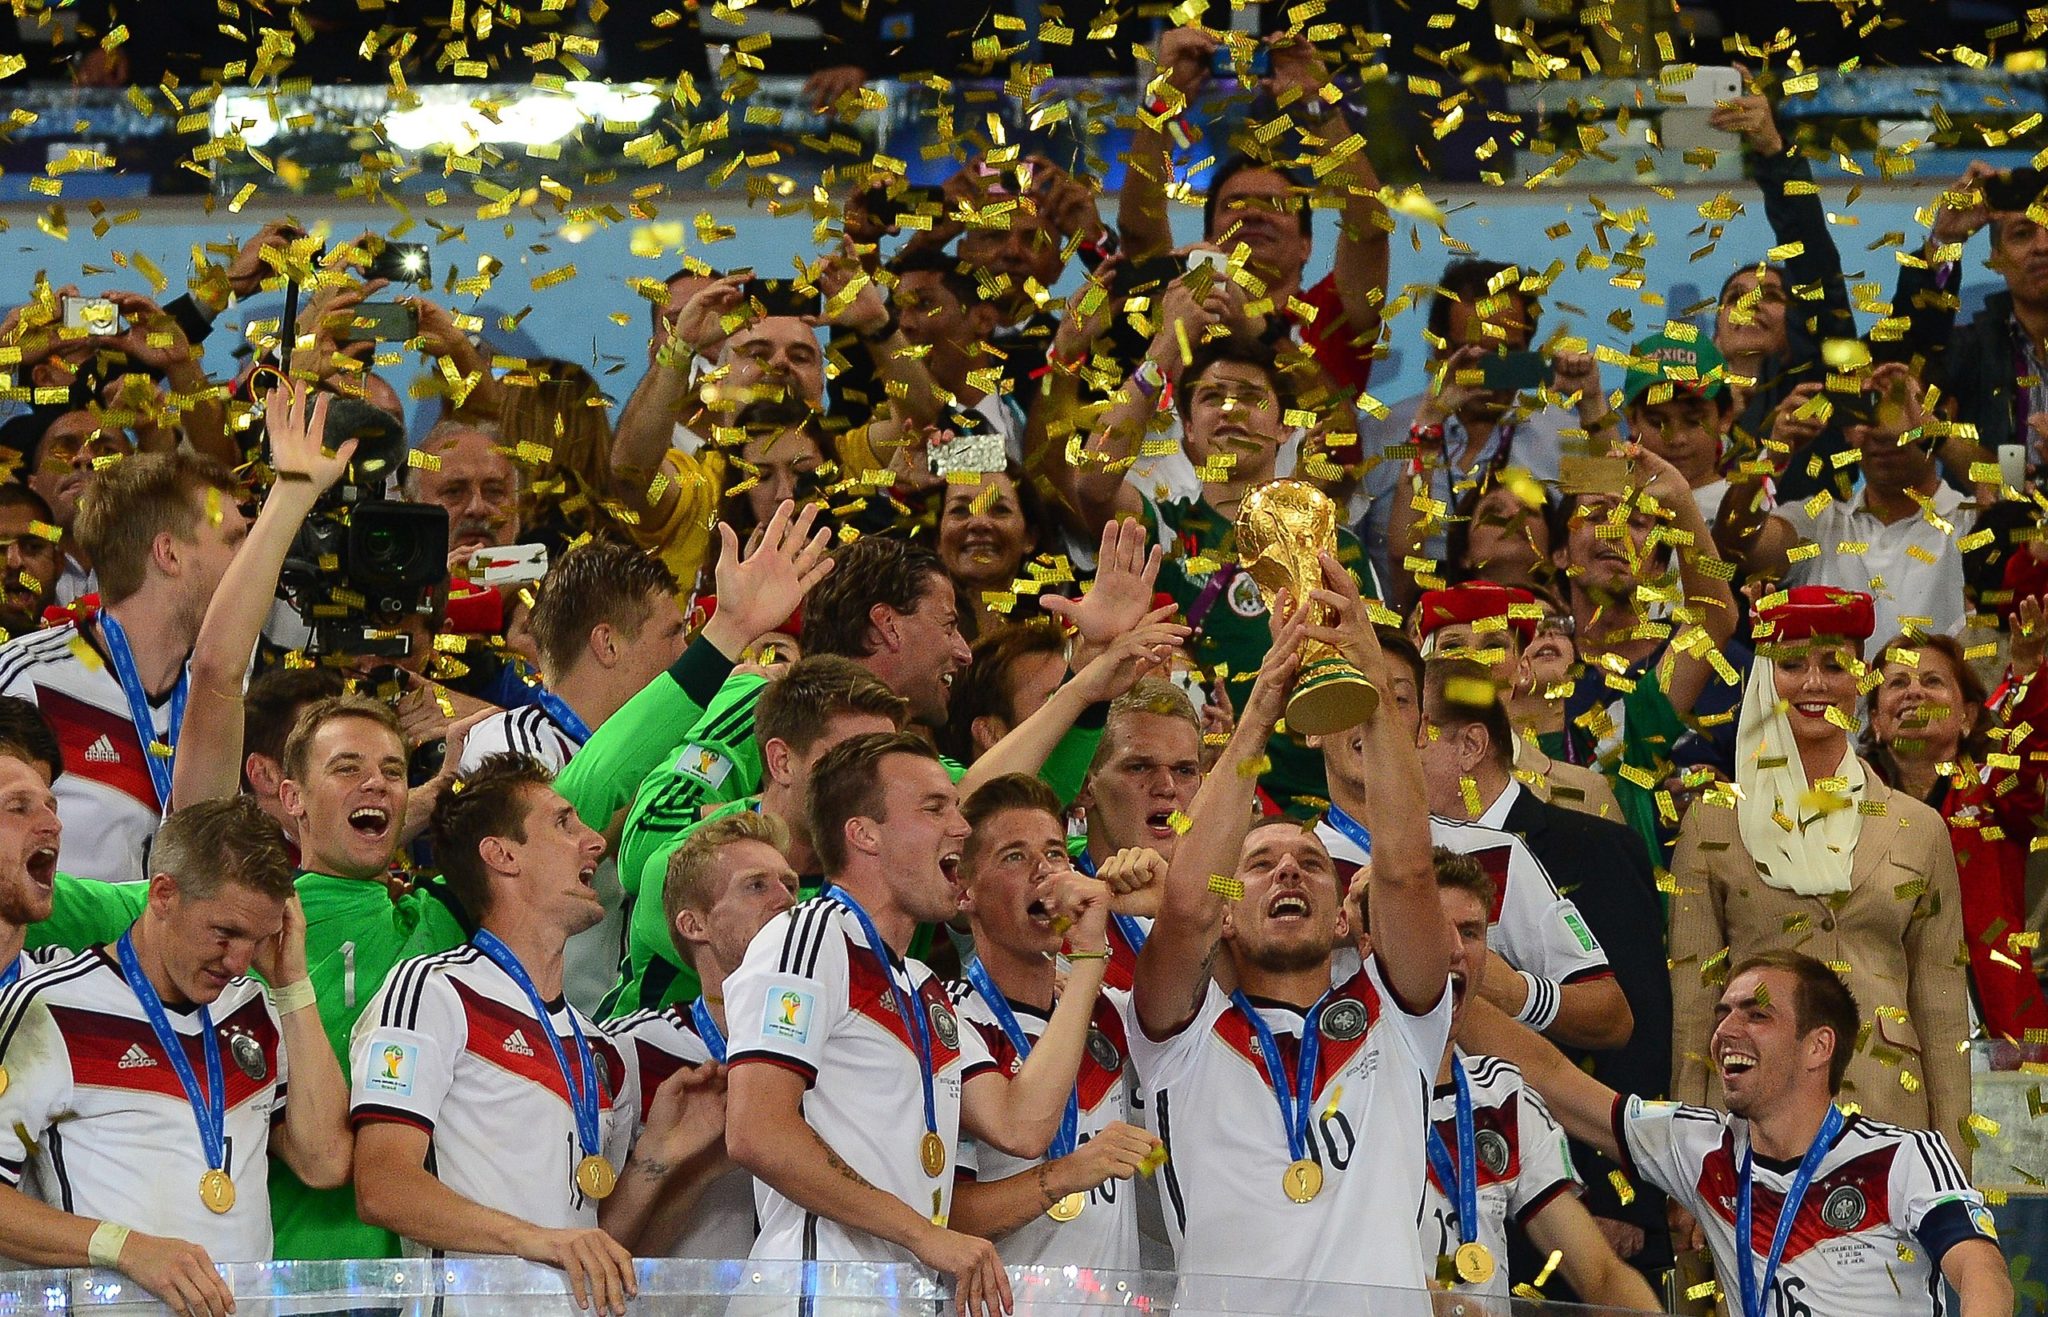 6 Fun Places to Watch the World Cup Final on Sunday